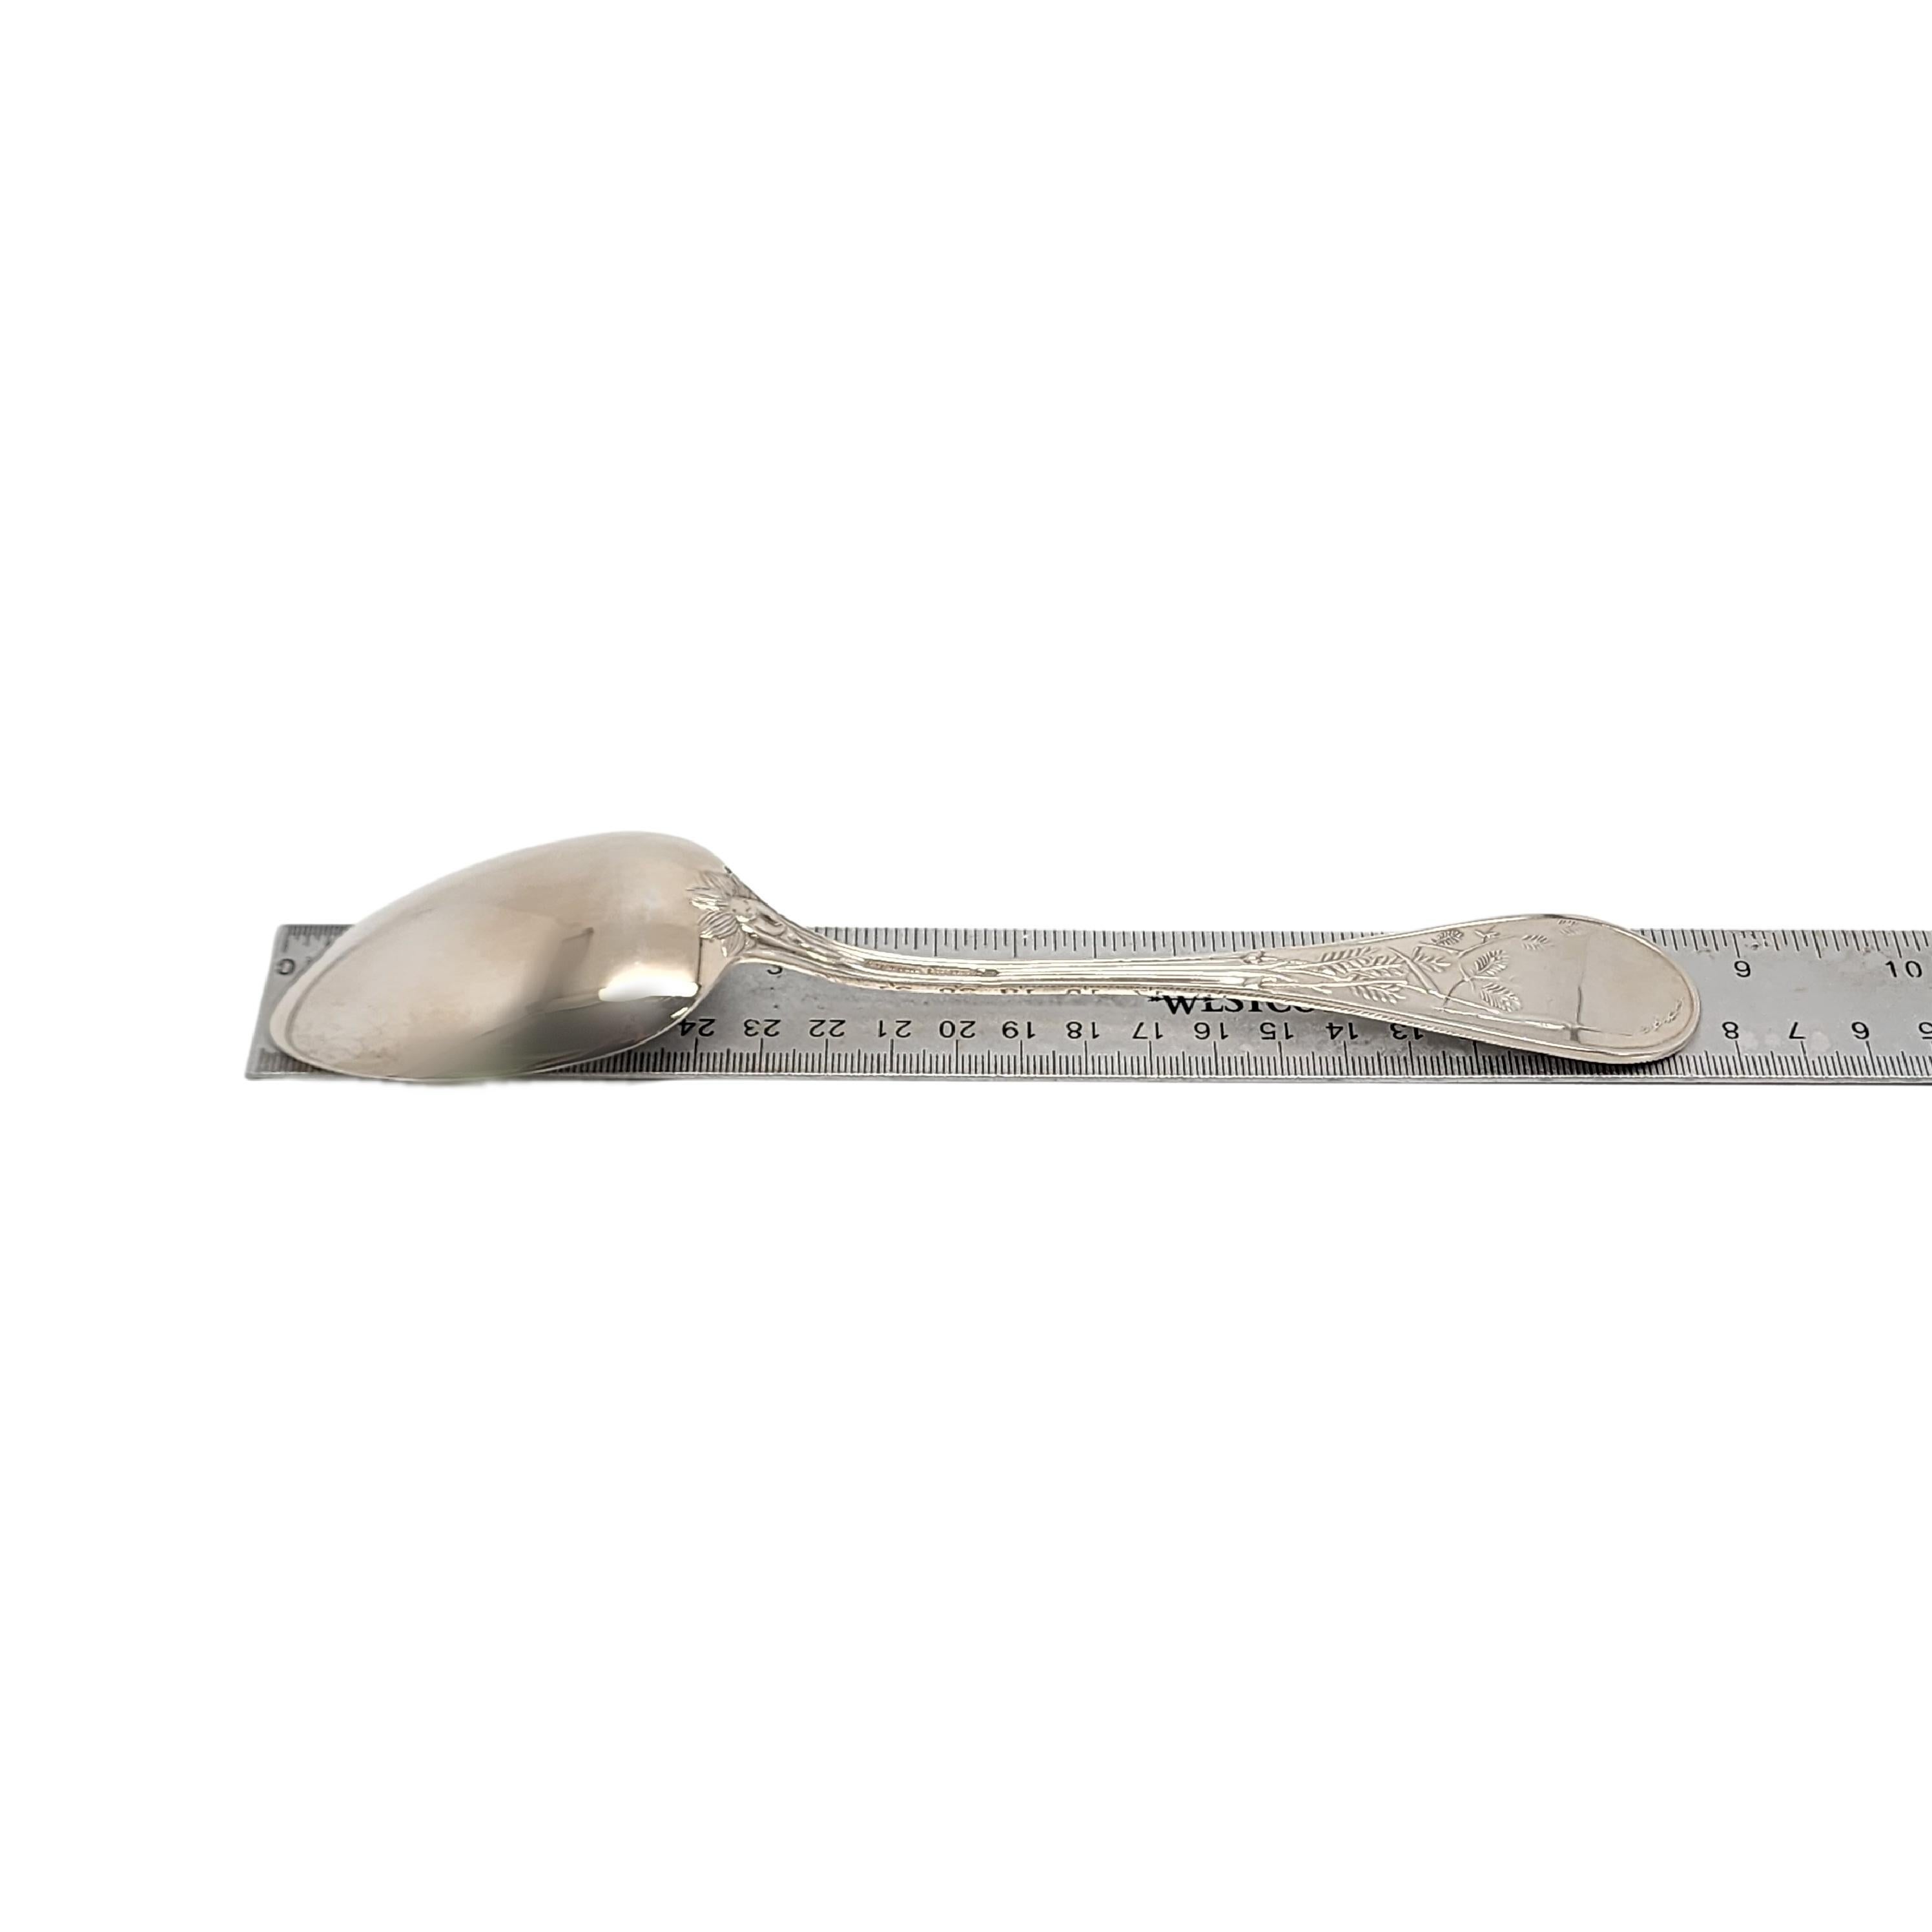 Tiffany & Co Audubon Sterling Silver Serving Tablespoon 8 5/8